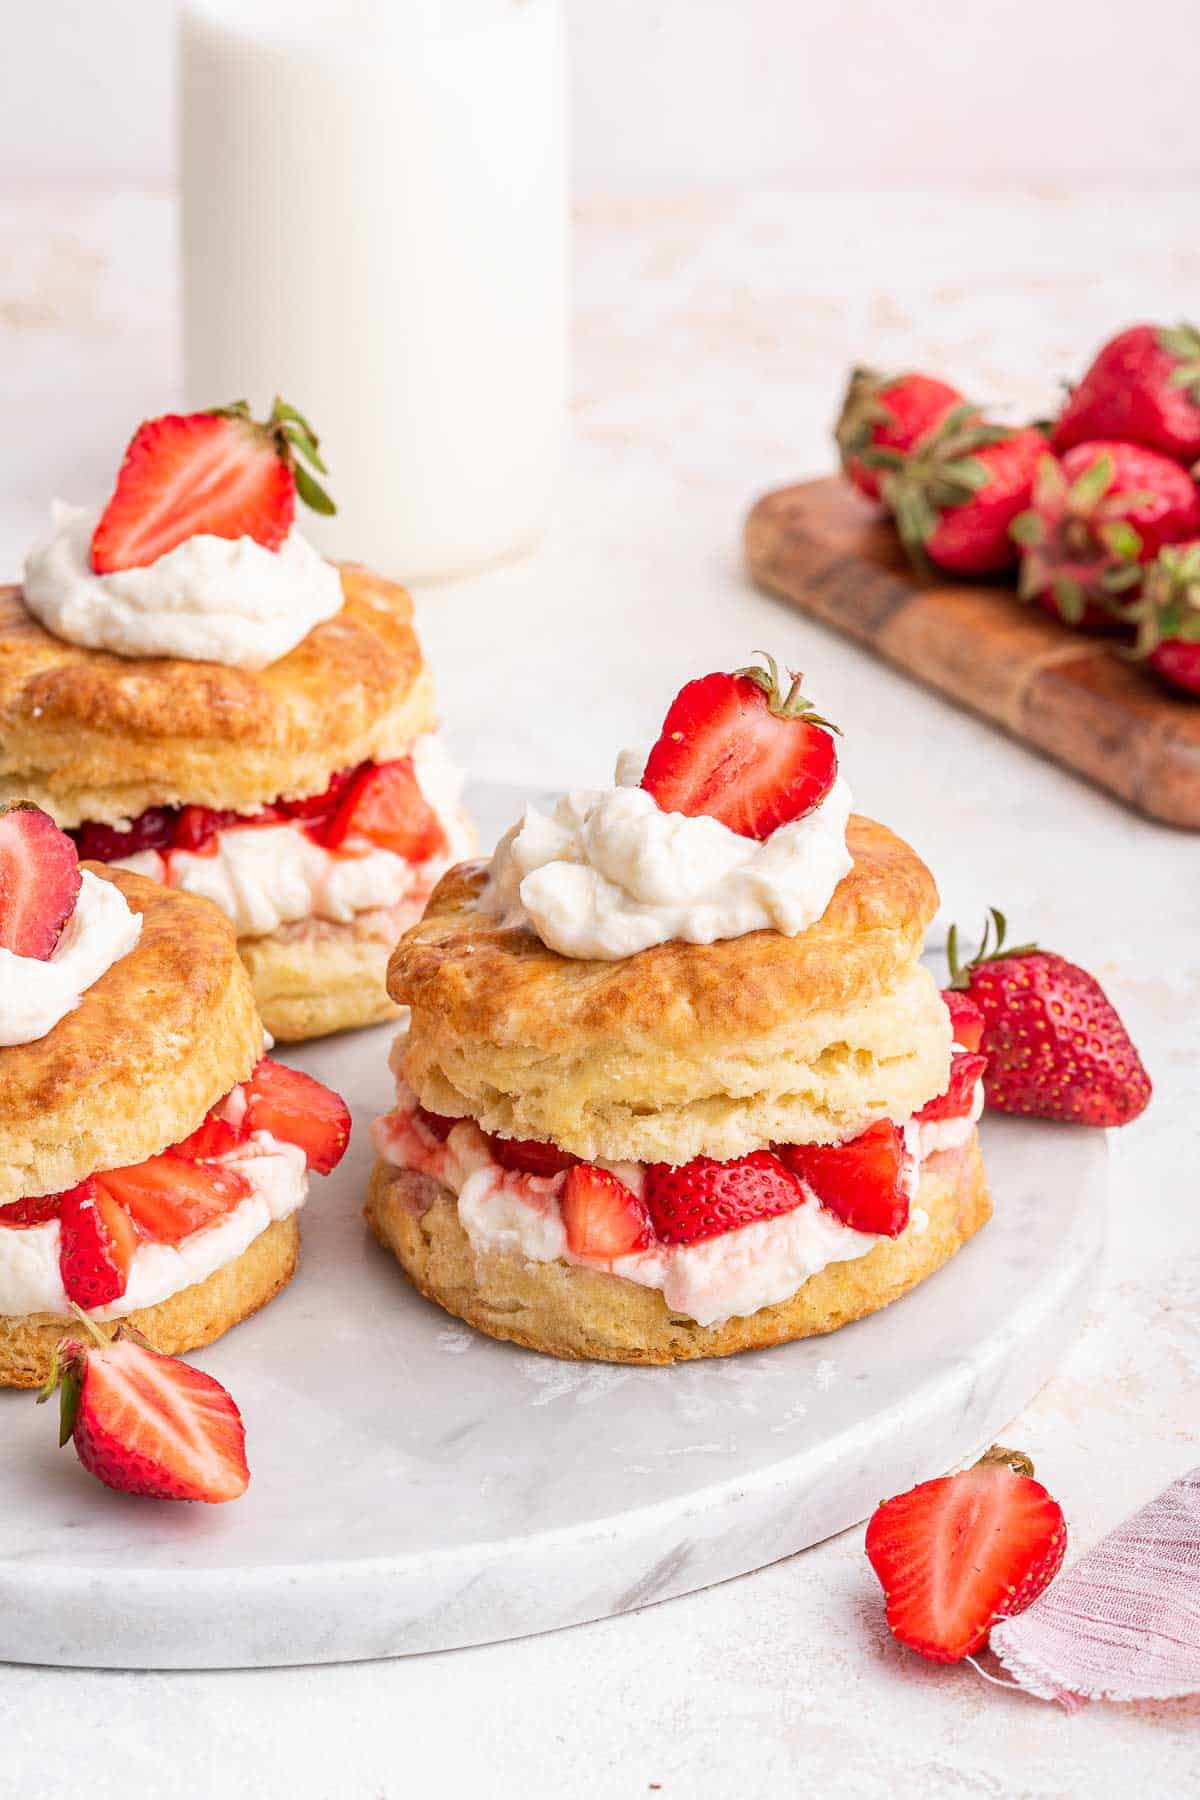 Vertical image of 3 strawberry shortcakes on white surface.